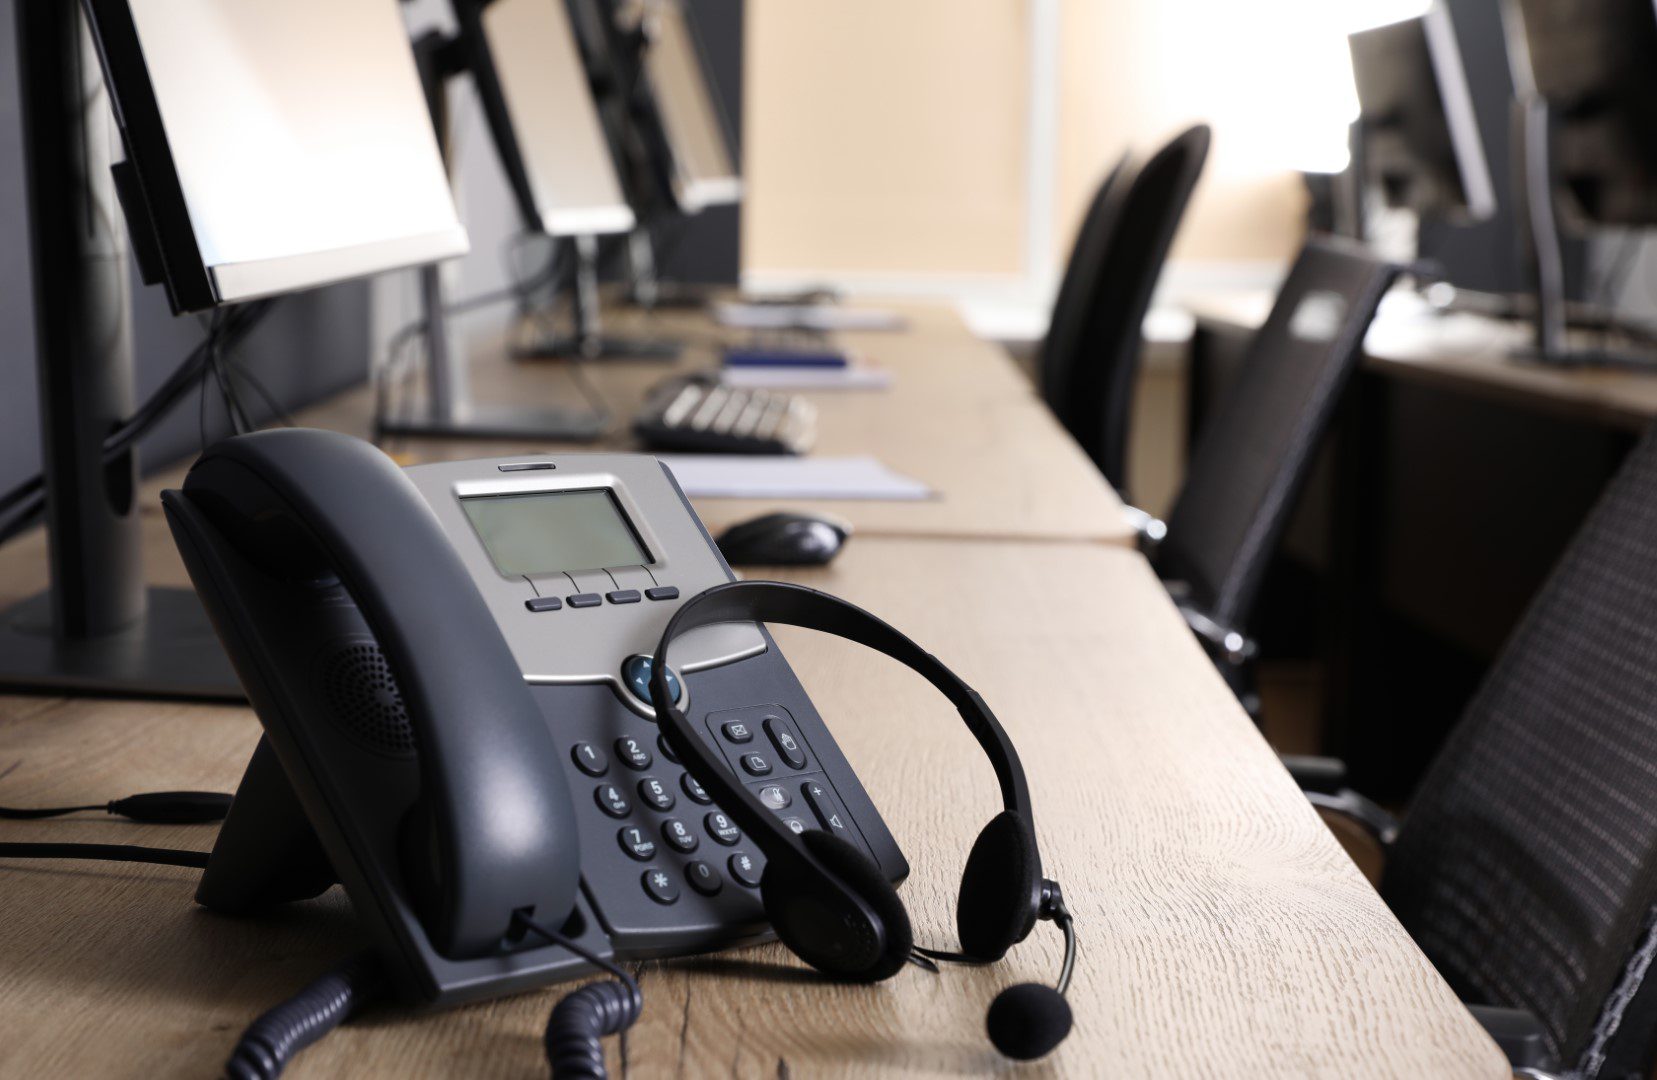 3CX PBX Systems for Showrooms